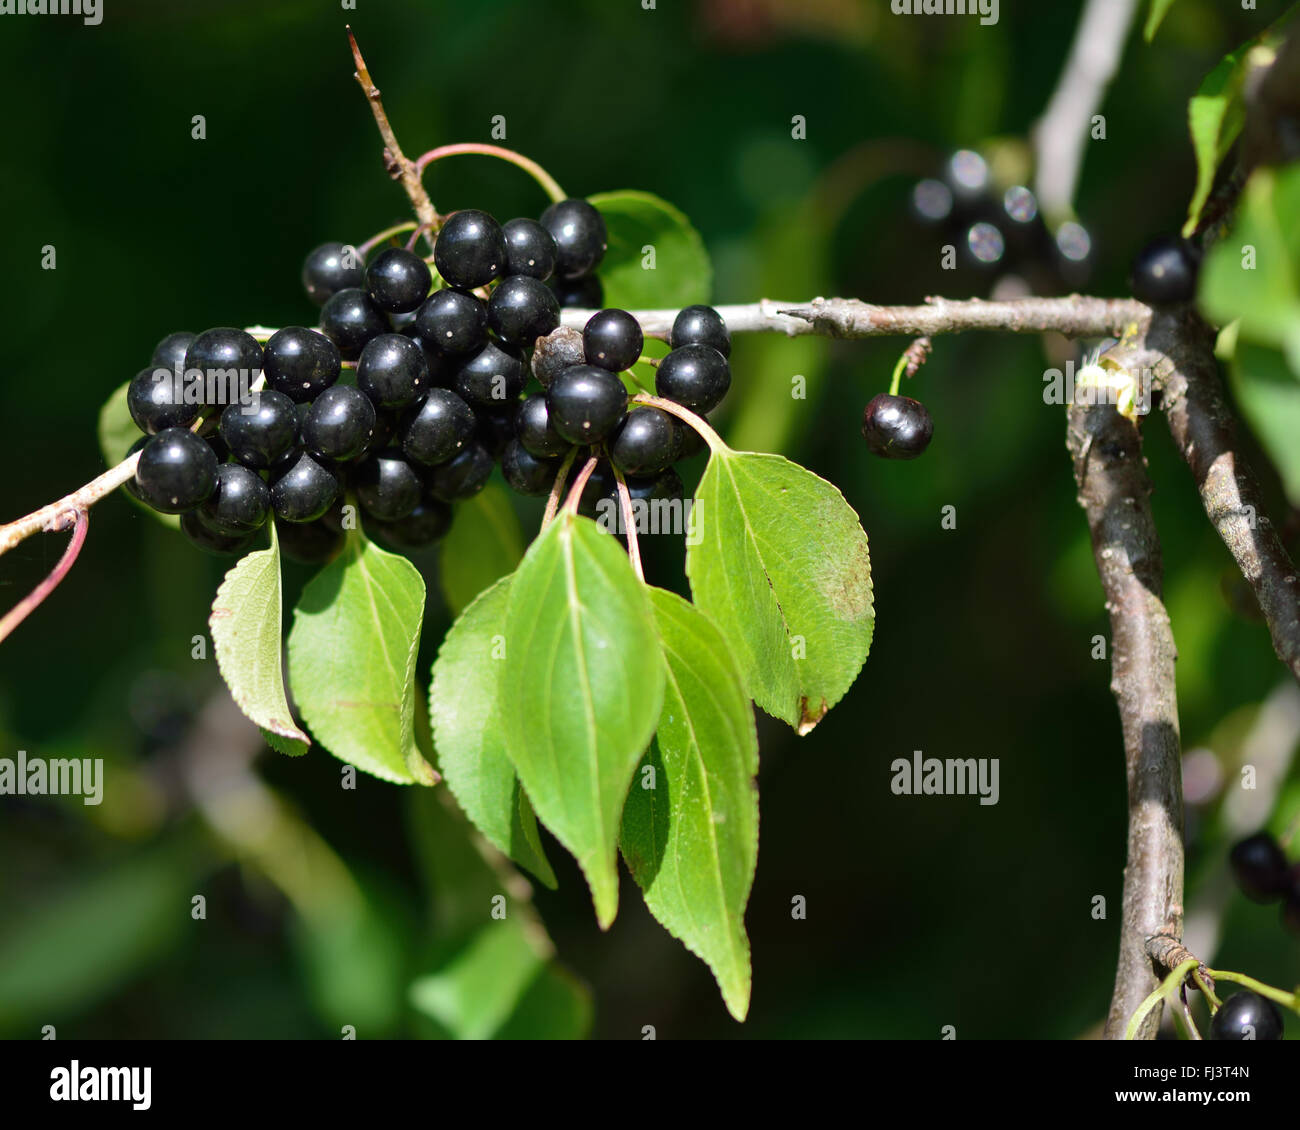 Buckthorn (Rhamnus catharticus). Black berries on a branch with leaves, on thorn bush in the family Rhamnaceae Stock Photo